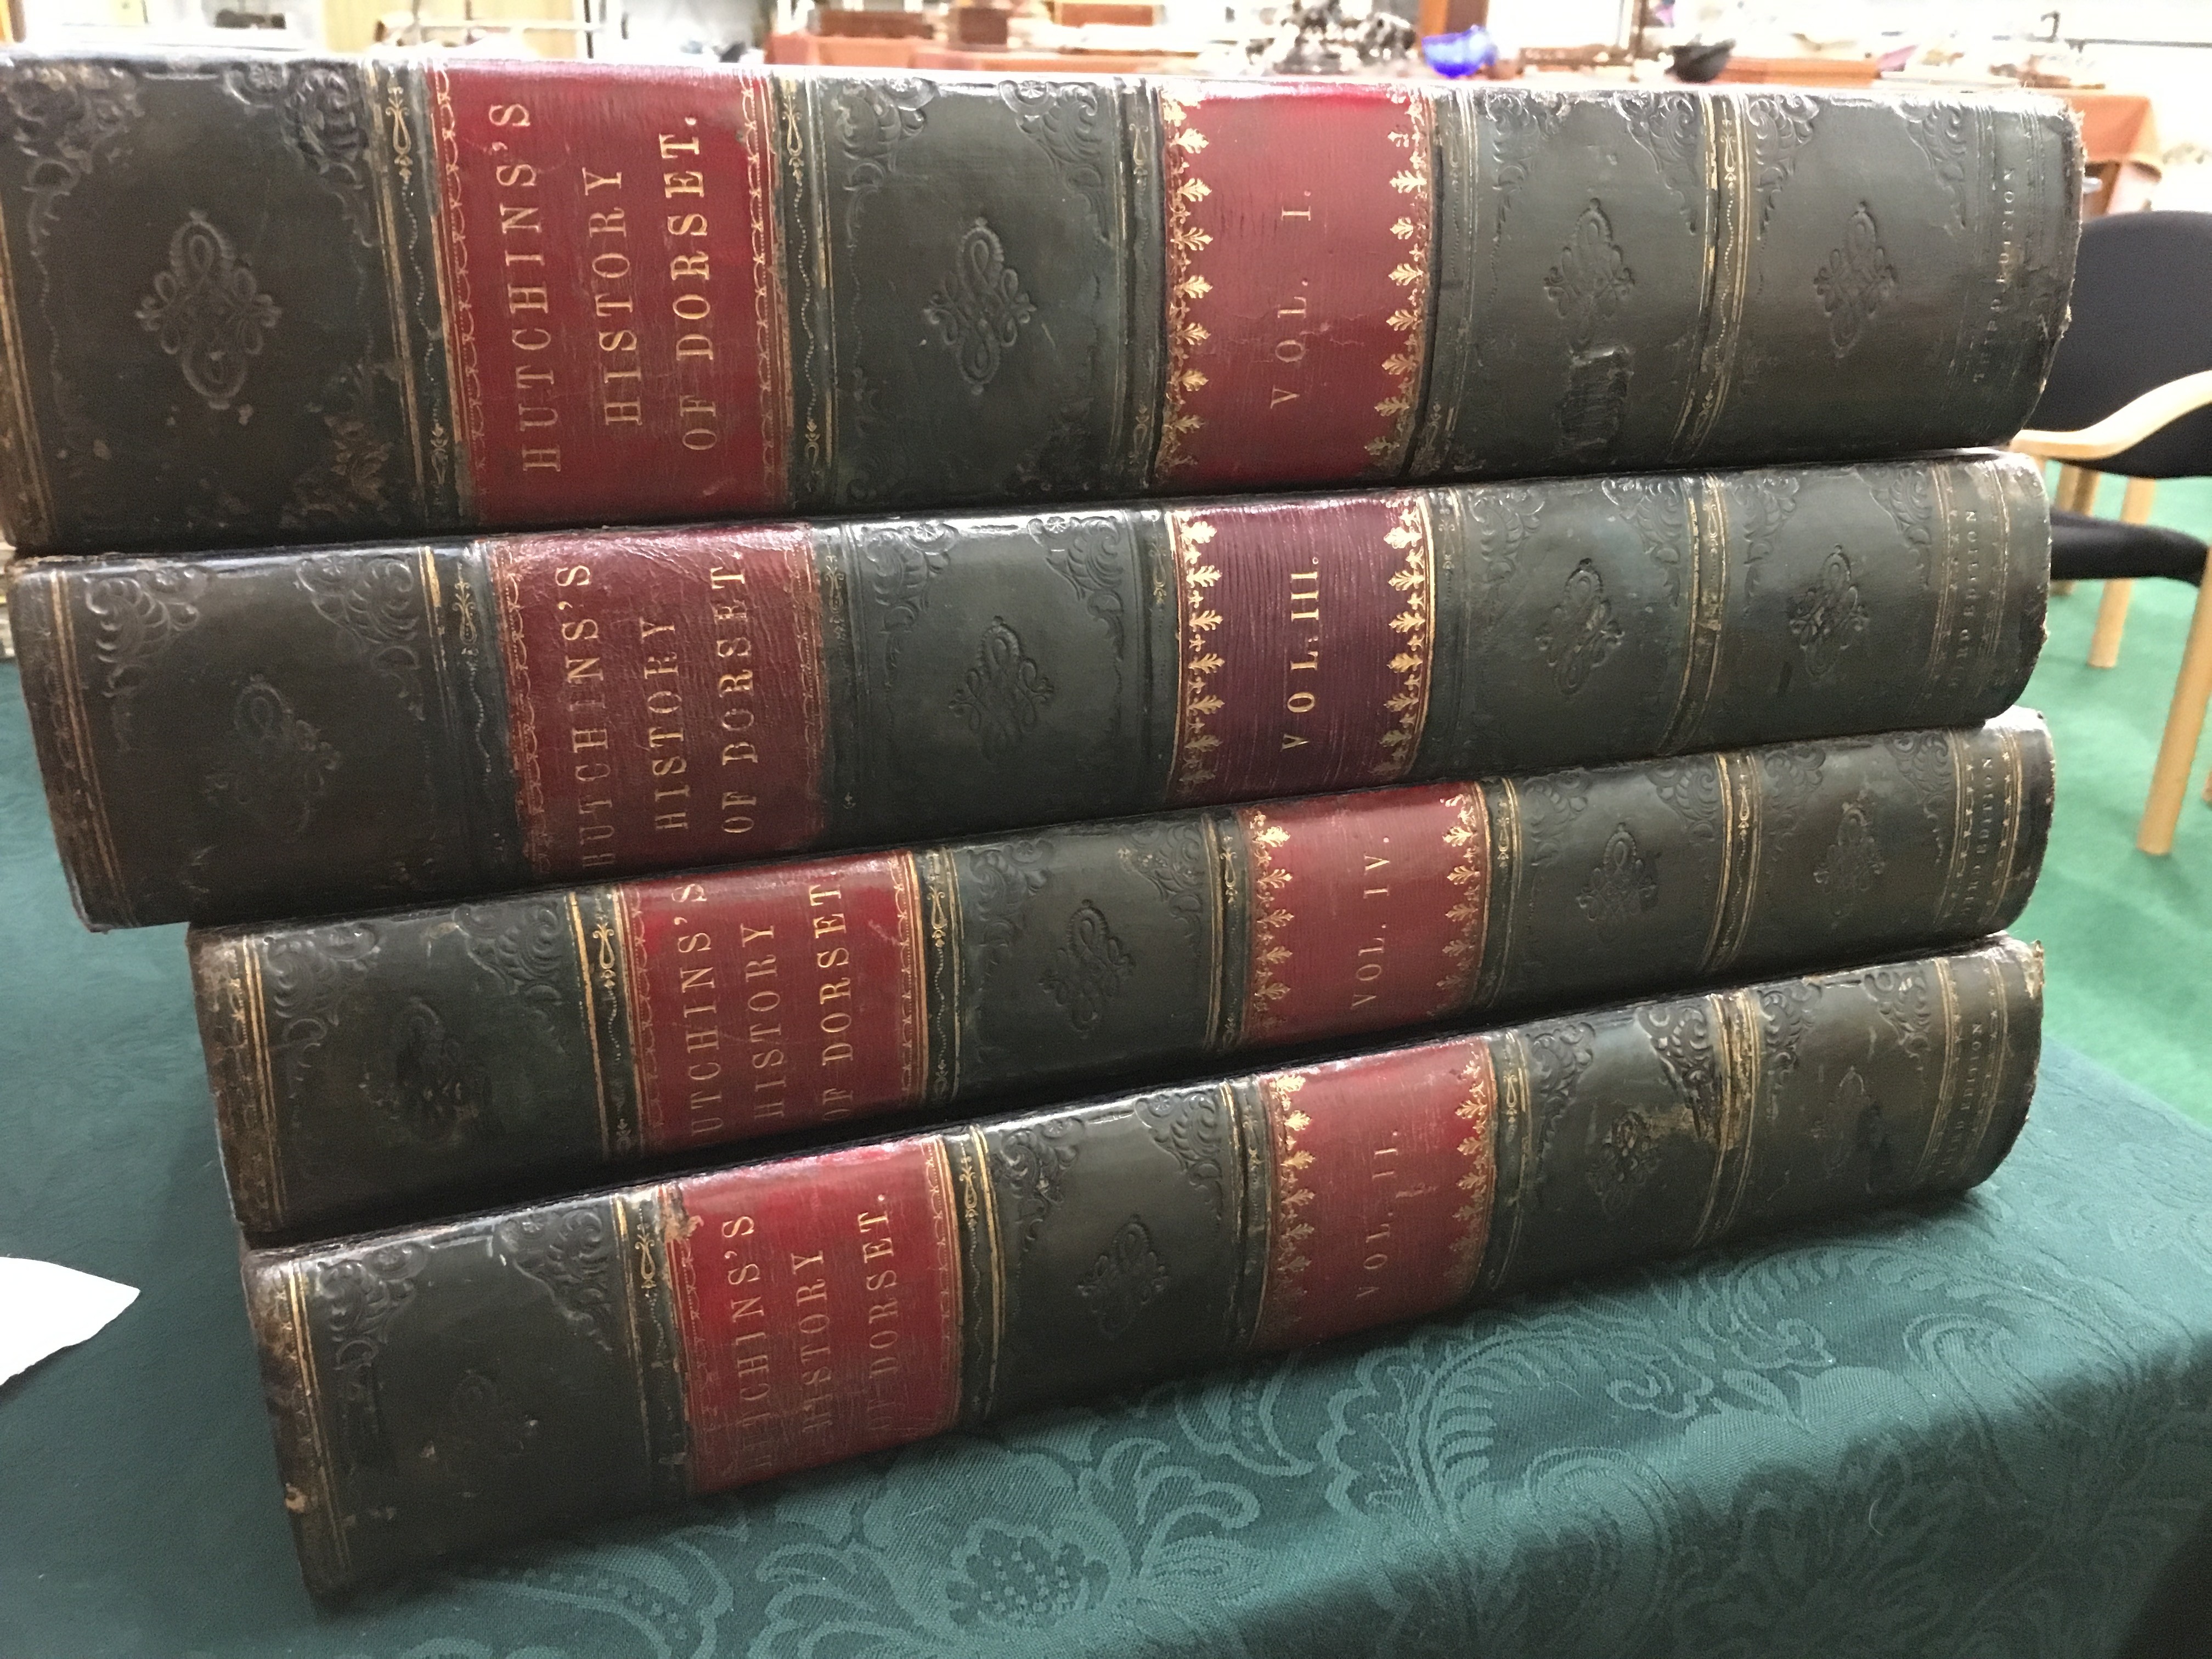 Hutchins History of Dorset: Volumes I - IV in original leather half bindings with marble boards.